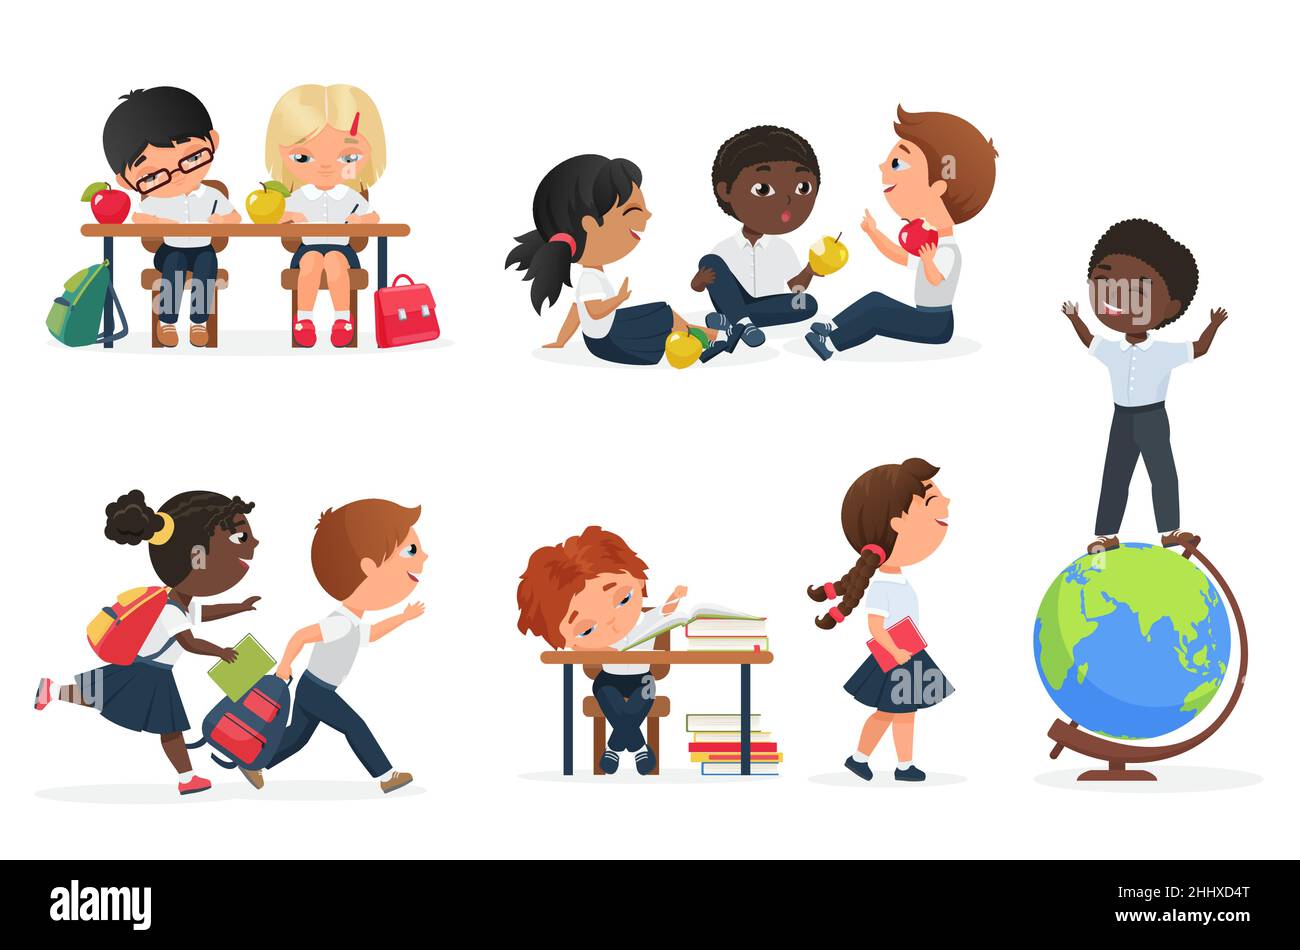 Kids in school vector illustration set. Cartoon flat schooling education collection with happy friends children characters study, read books, have fun Stock Vector